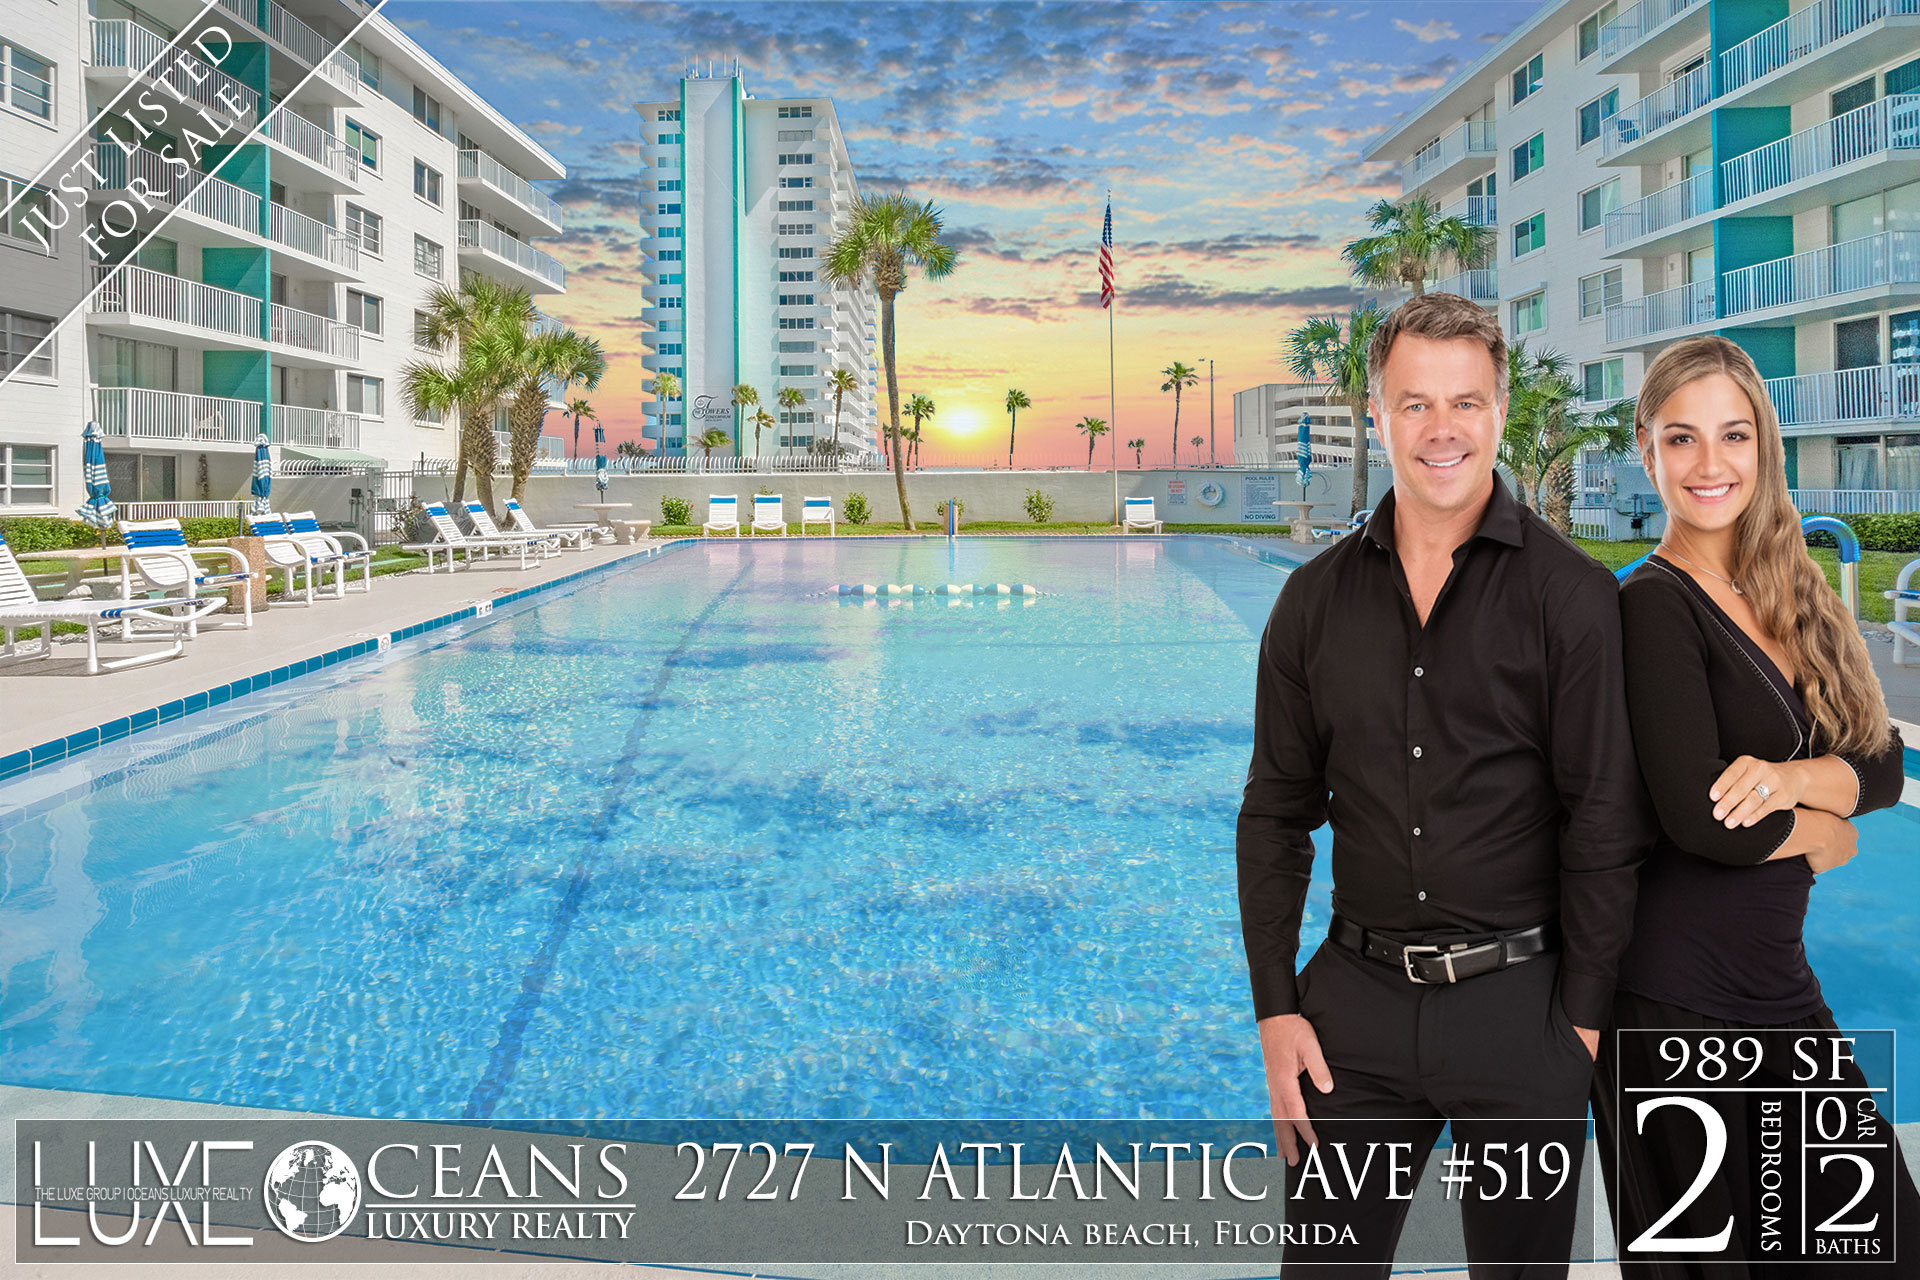 Bellair Ocean View condos For Sale at 2727 N Atlantic Ave 519 Daytona Beach The LUXE Group 386-299-4043